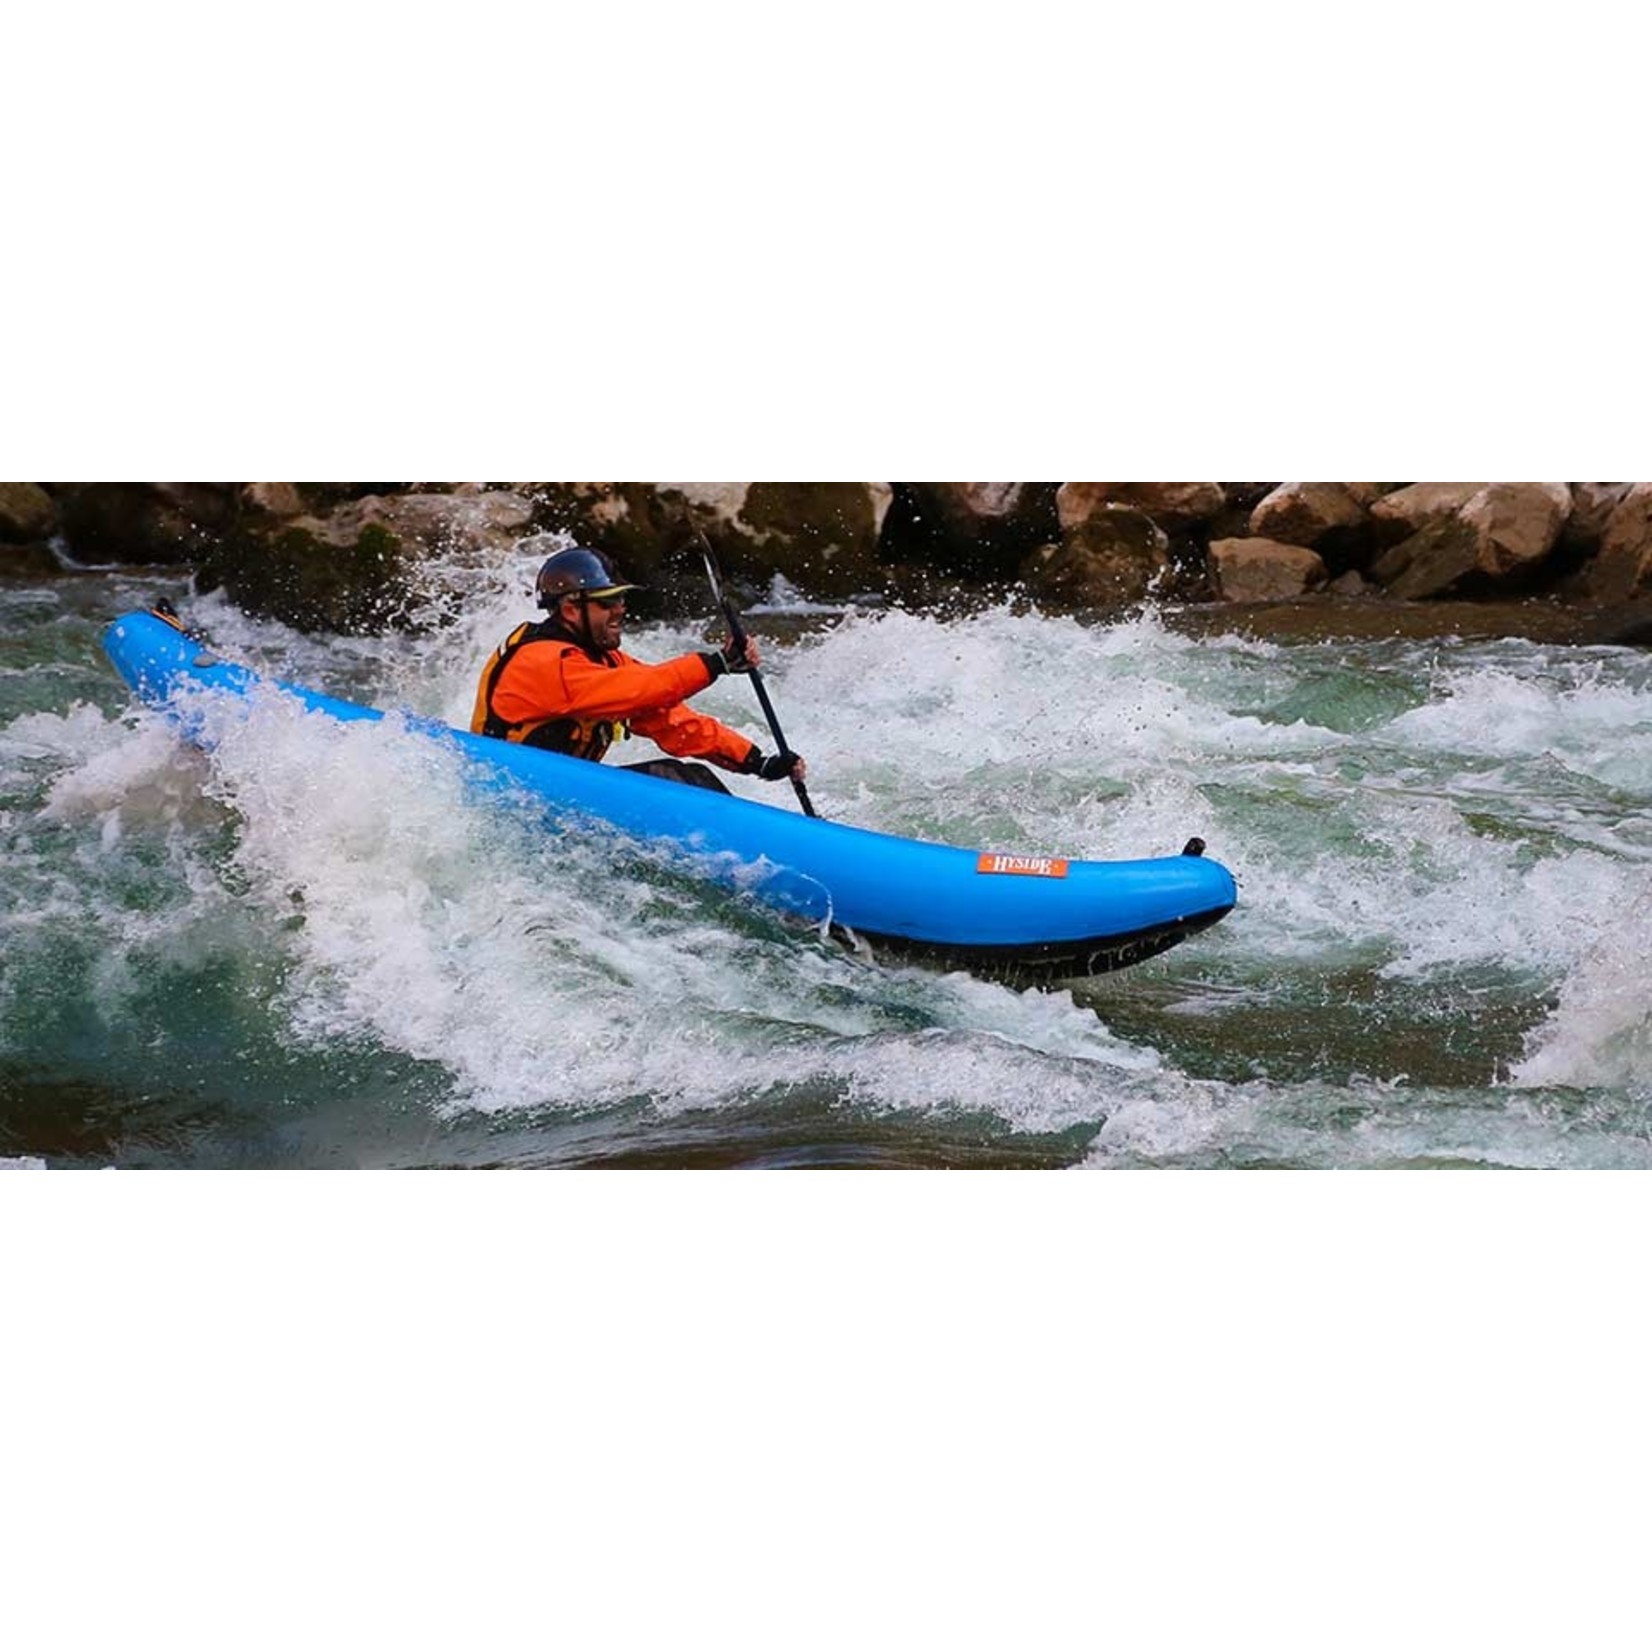 Hyside Inflatables Hyside K1 10.5 Kayak